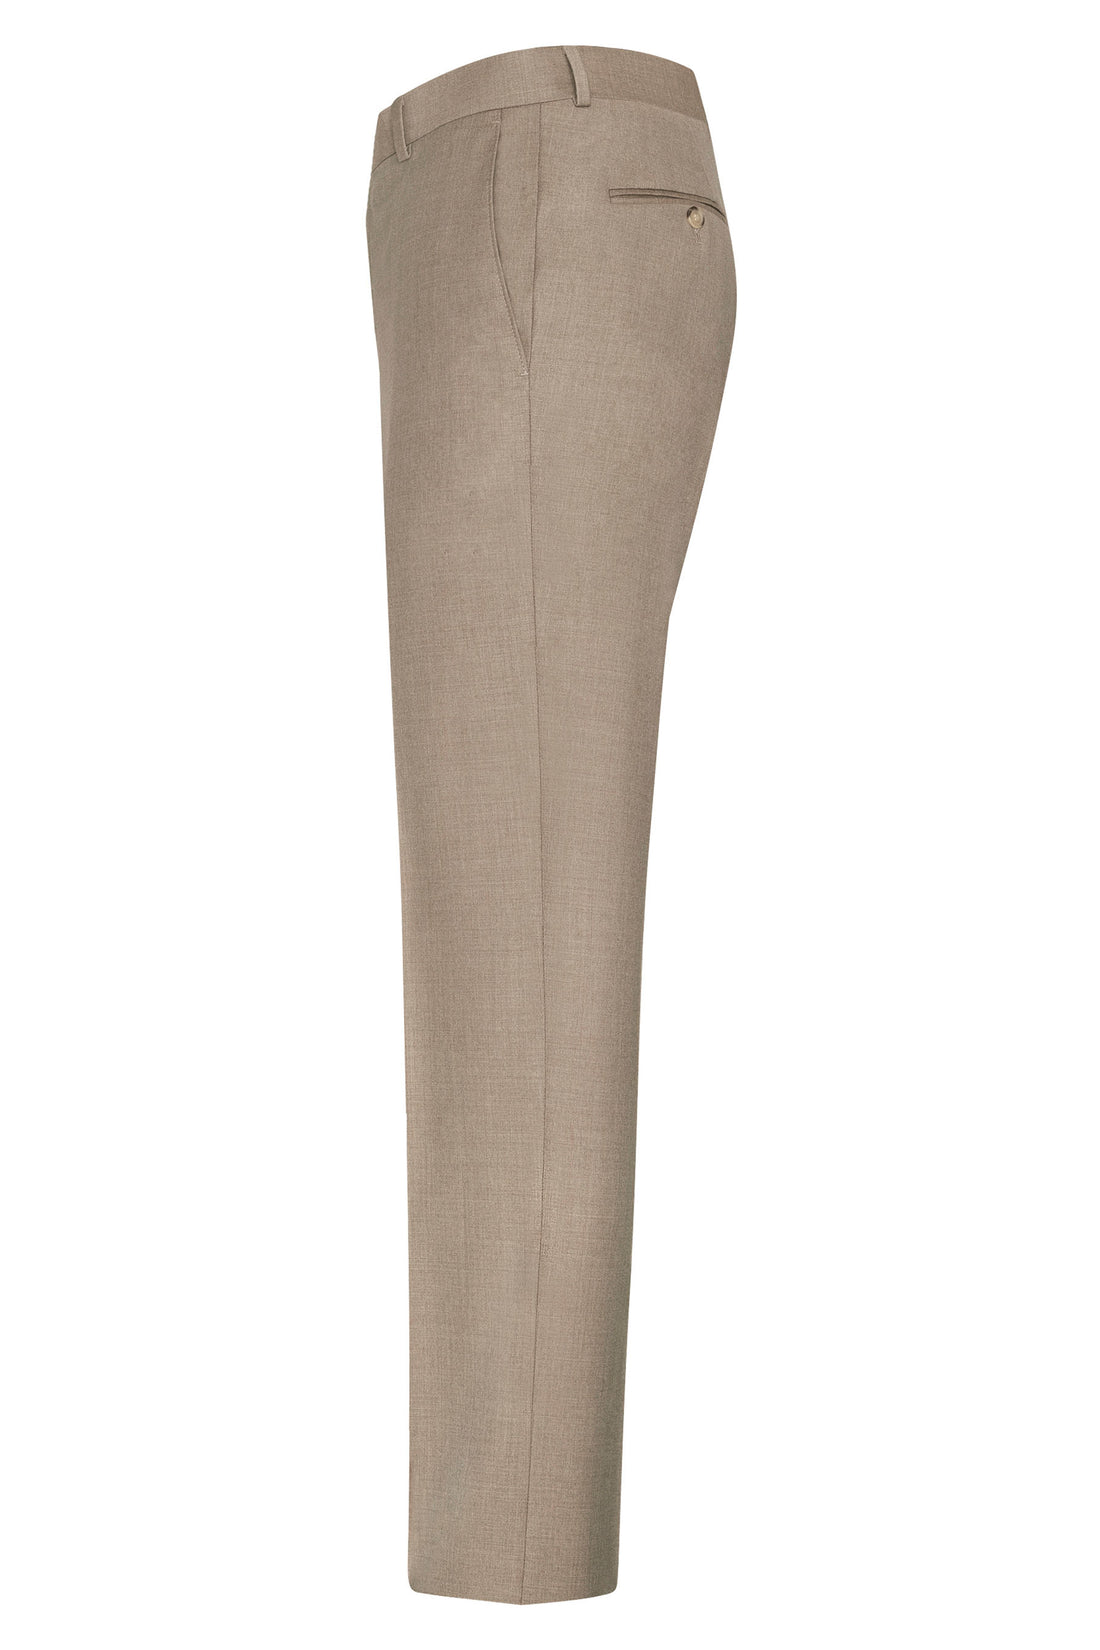 Tan Flat Front Trousers